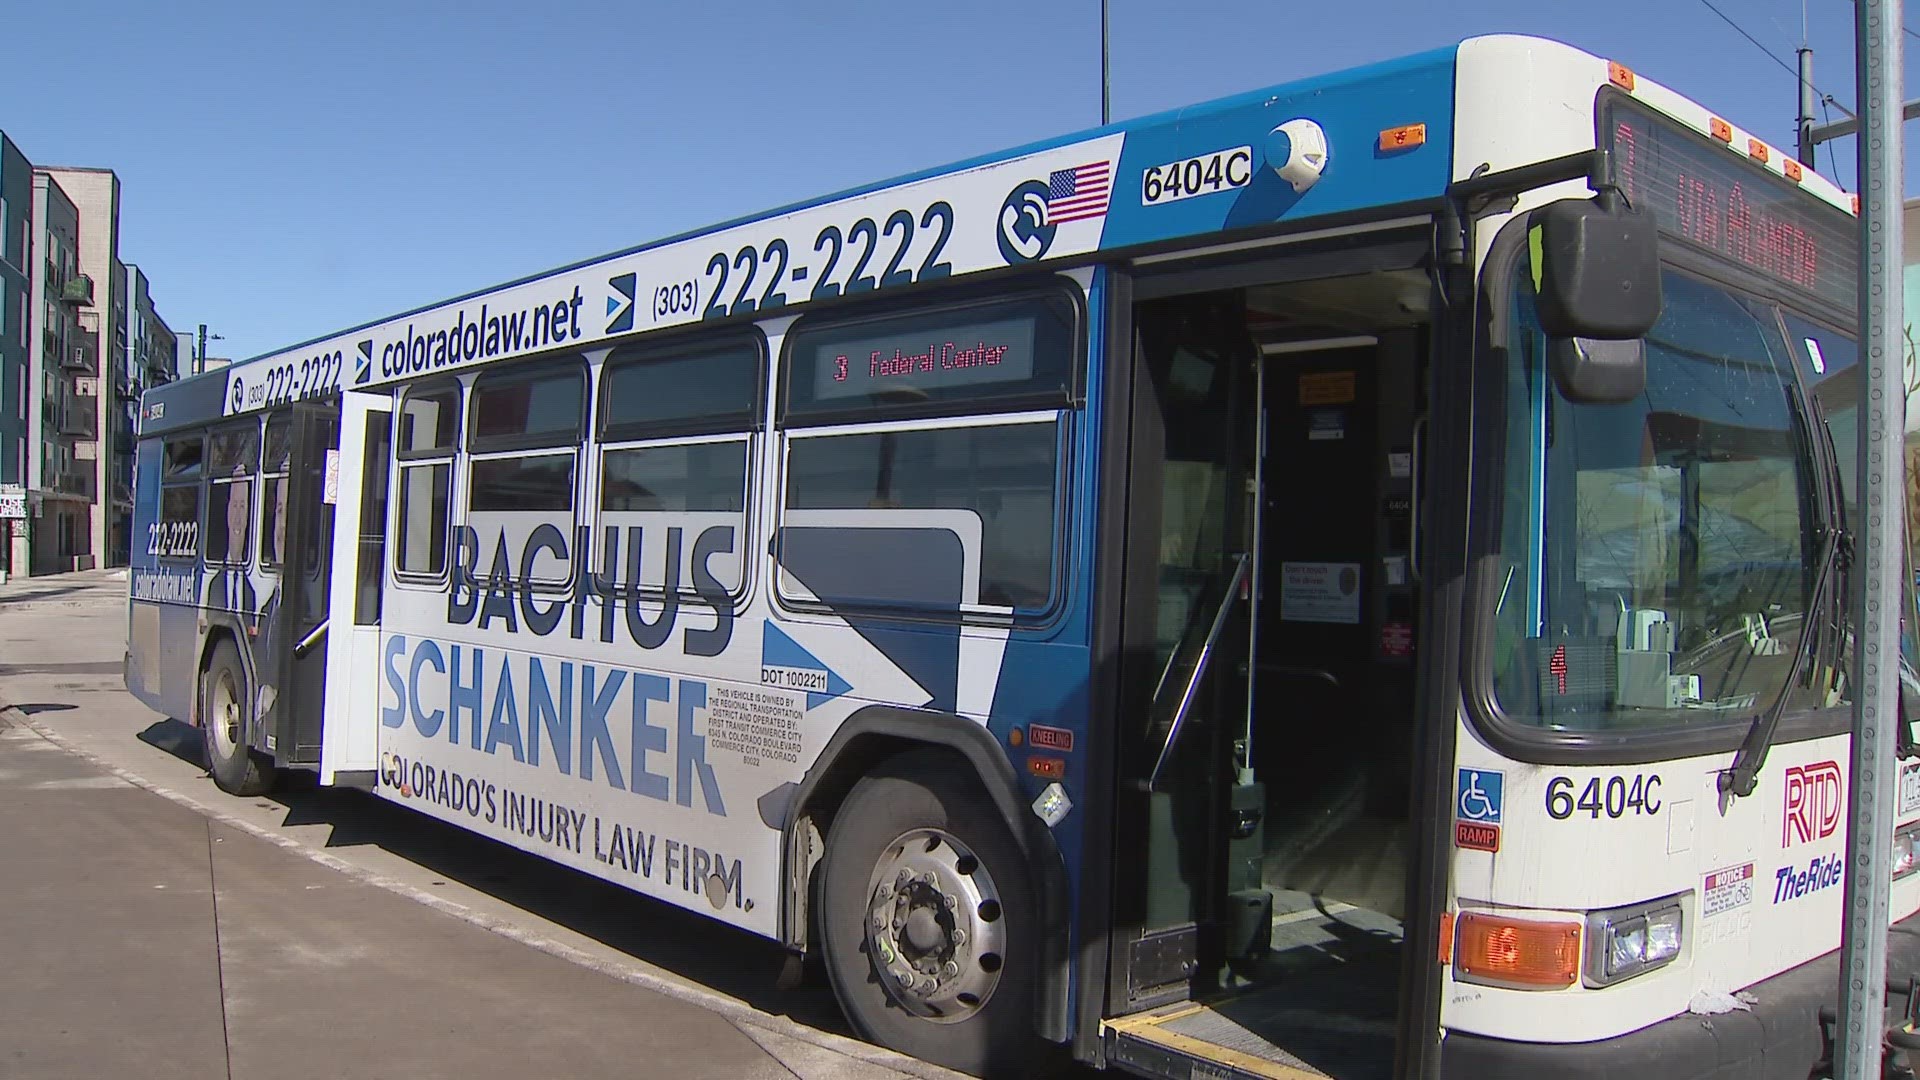 RTD hopes these free fares will encourage more new riders to take public transit, thus reducing the number of vehicles on the road.